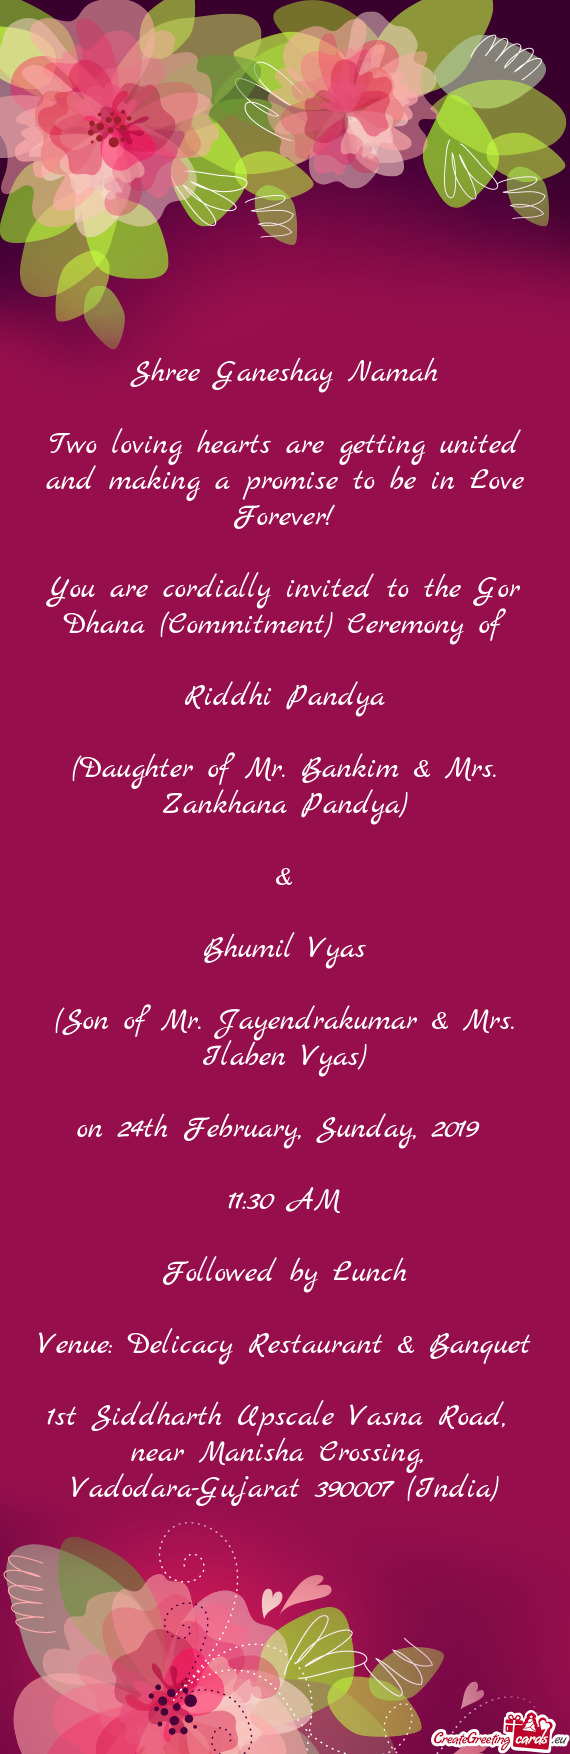 You are cordially invited to the Gor Dhana (Commitment) Ceremony of